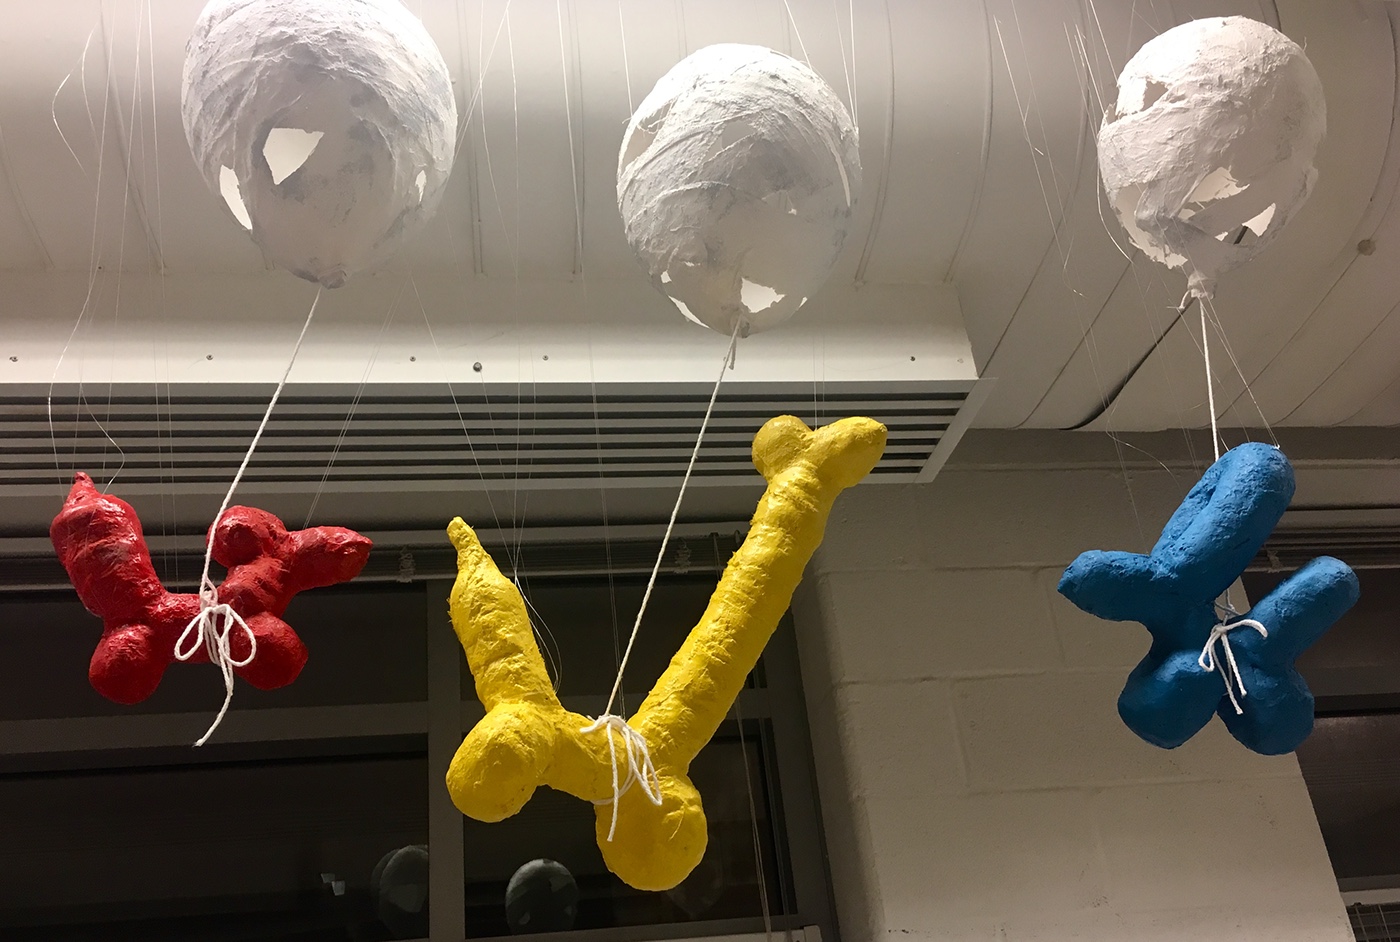 spray paint balloon plaster sculpture red blue yellow animals hanging suspended illusion